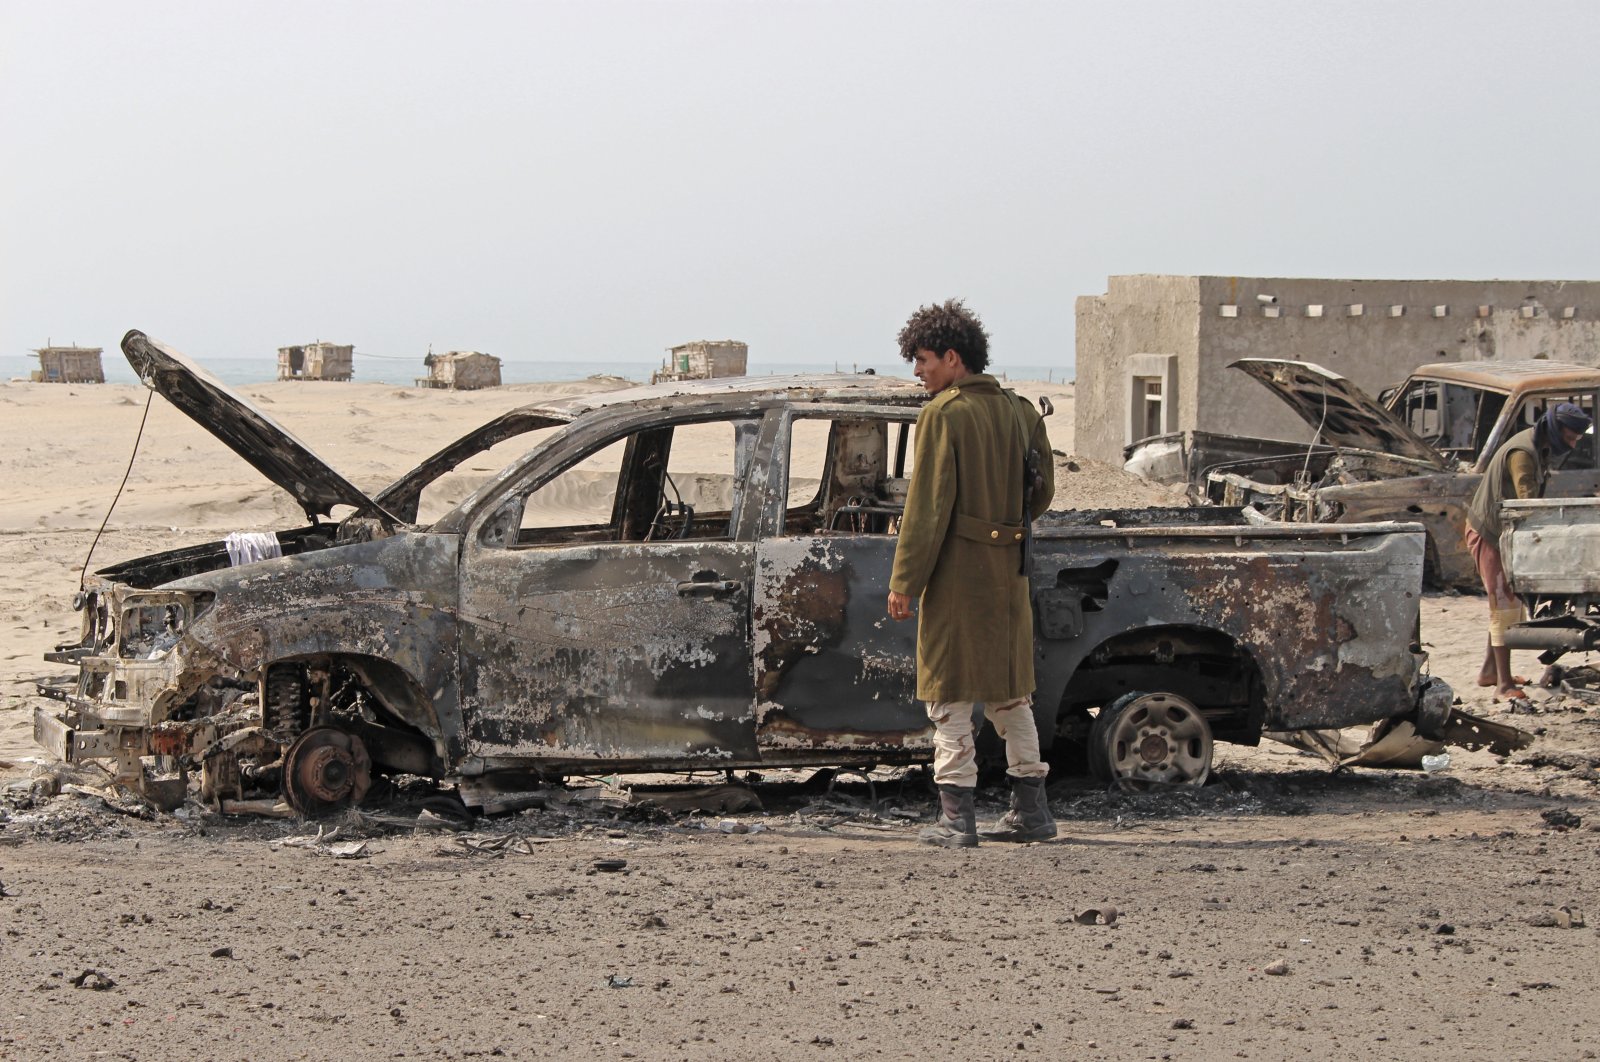 A Yemeni southern separatist fighter inspects the wreckage of government forces vehicles destroyed by UAE airstrikes, Aden, Aug. 30, 2019. (AP Photo)